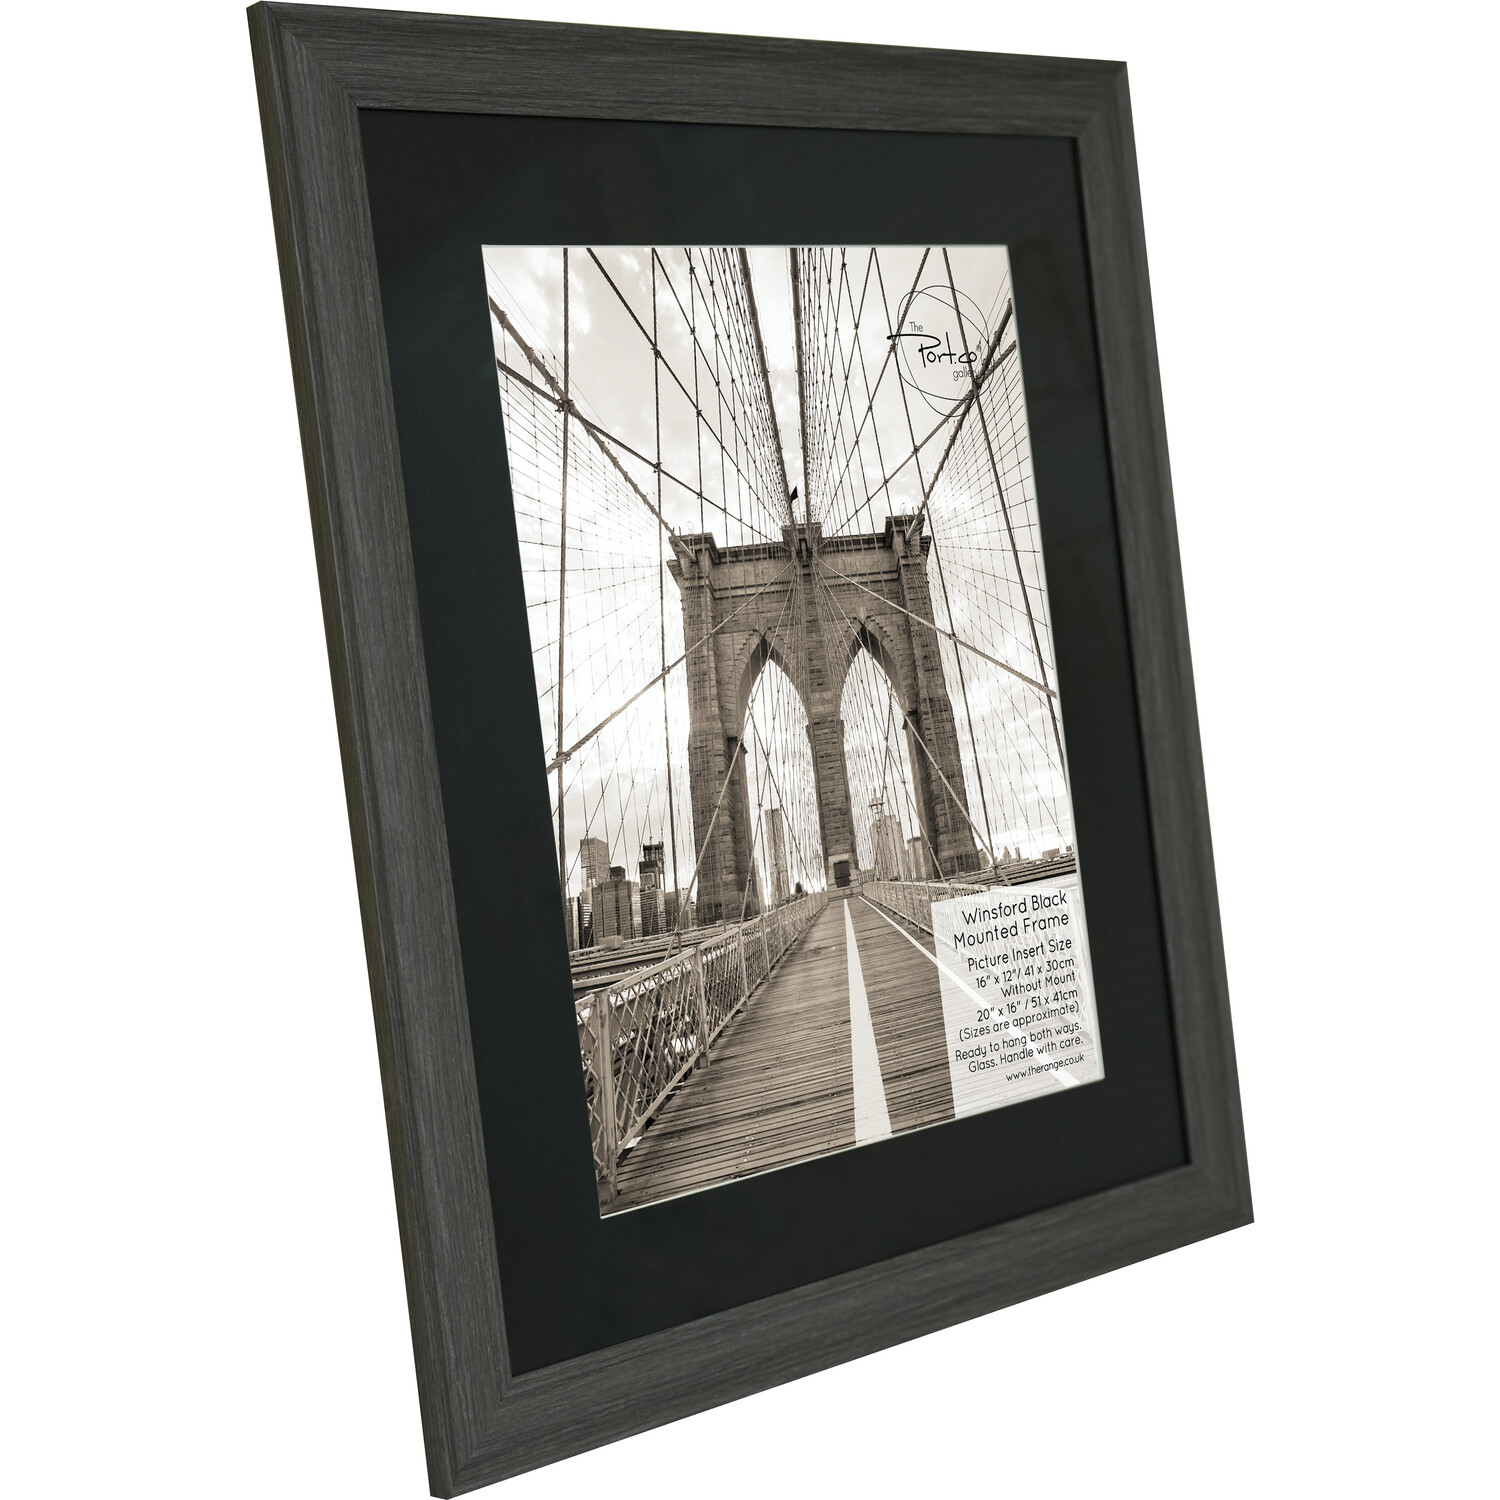 The Port. Co Gallery Winsford Black Mounted Photo Frame 16 x 12 inch Image 2